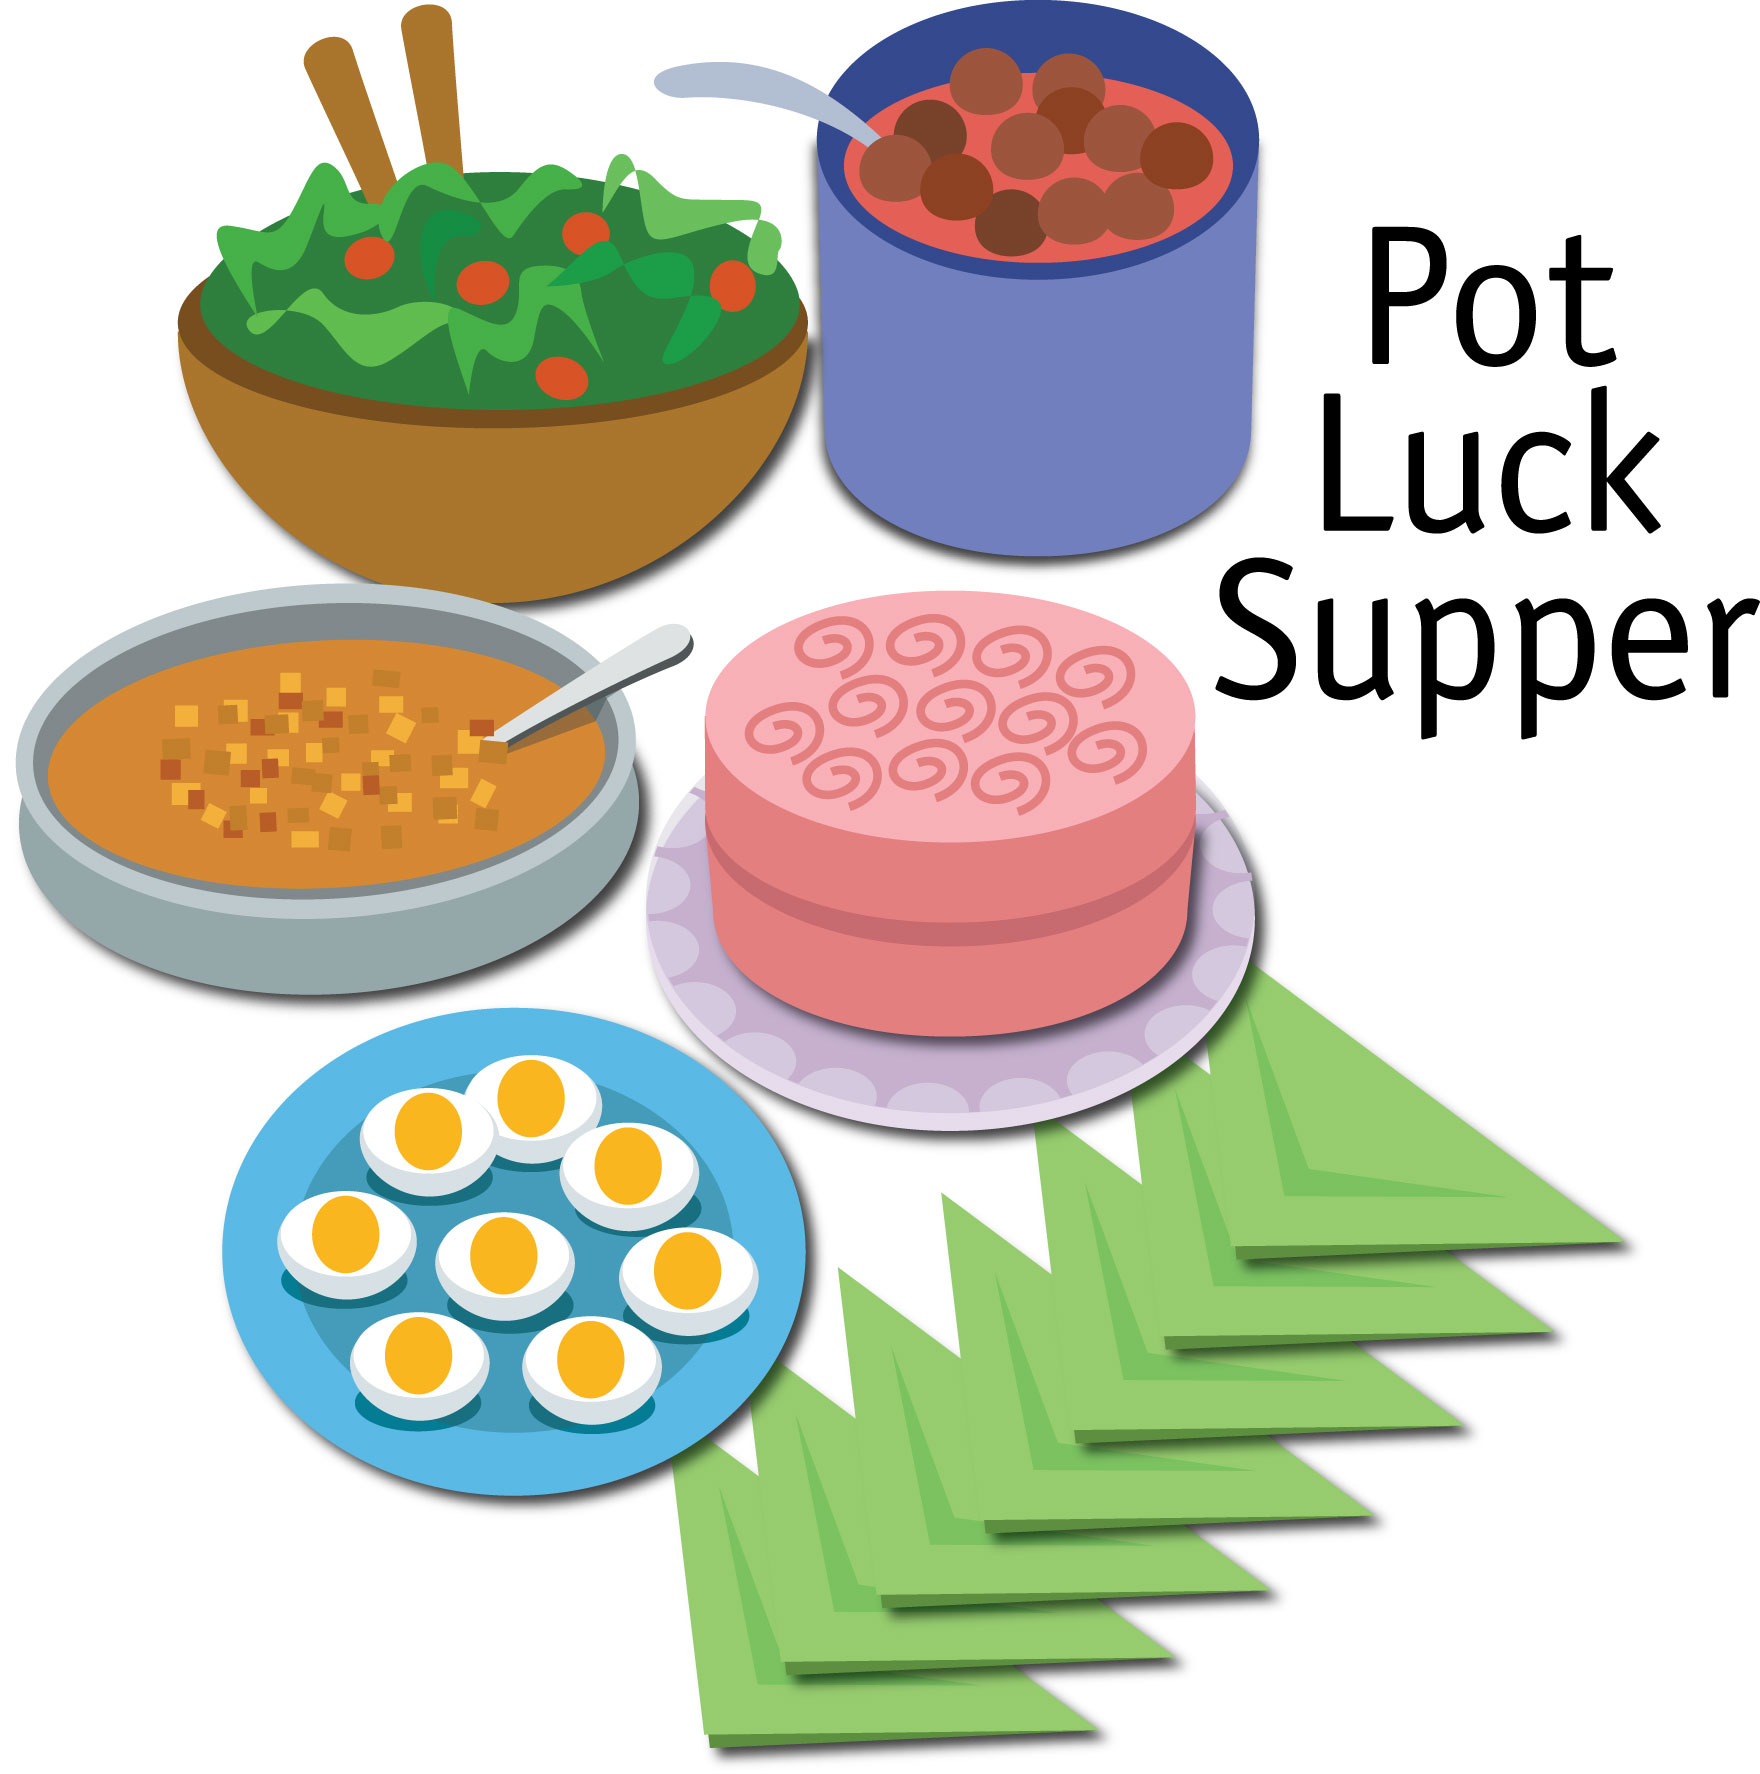 Free Potluck Meal Cliparts, Download Free Clip Art, Free Clip Art on.